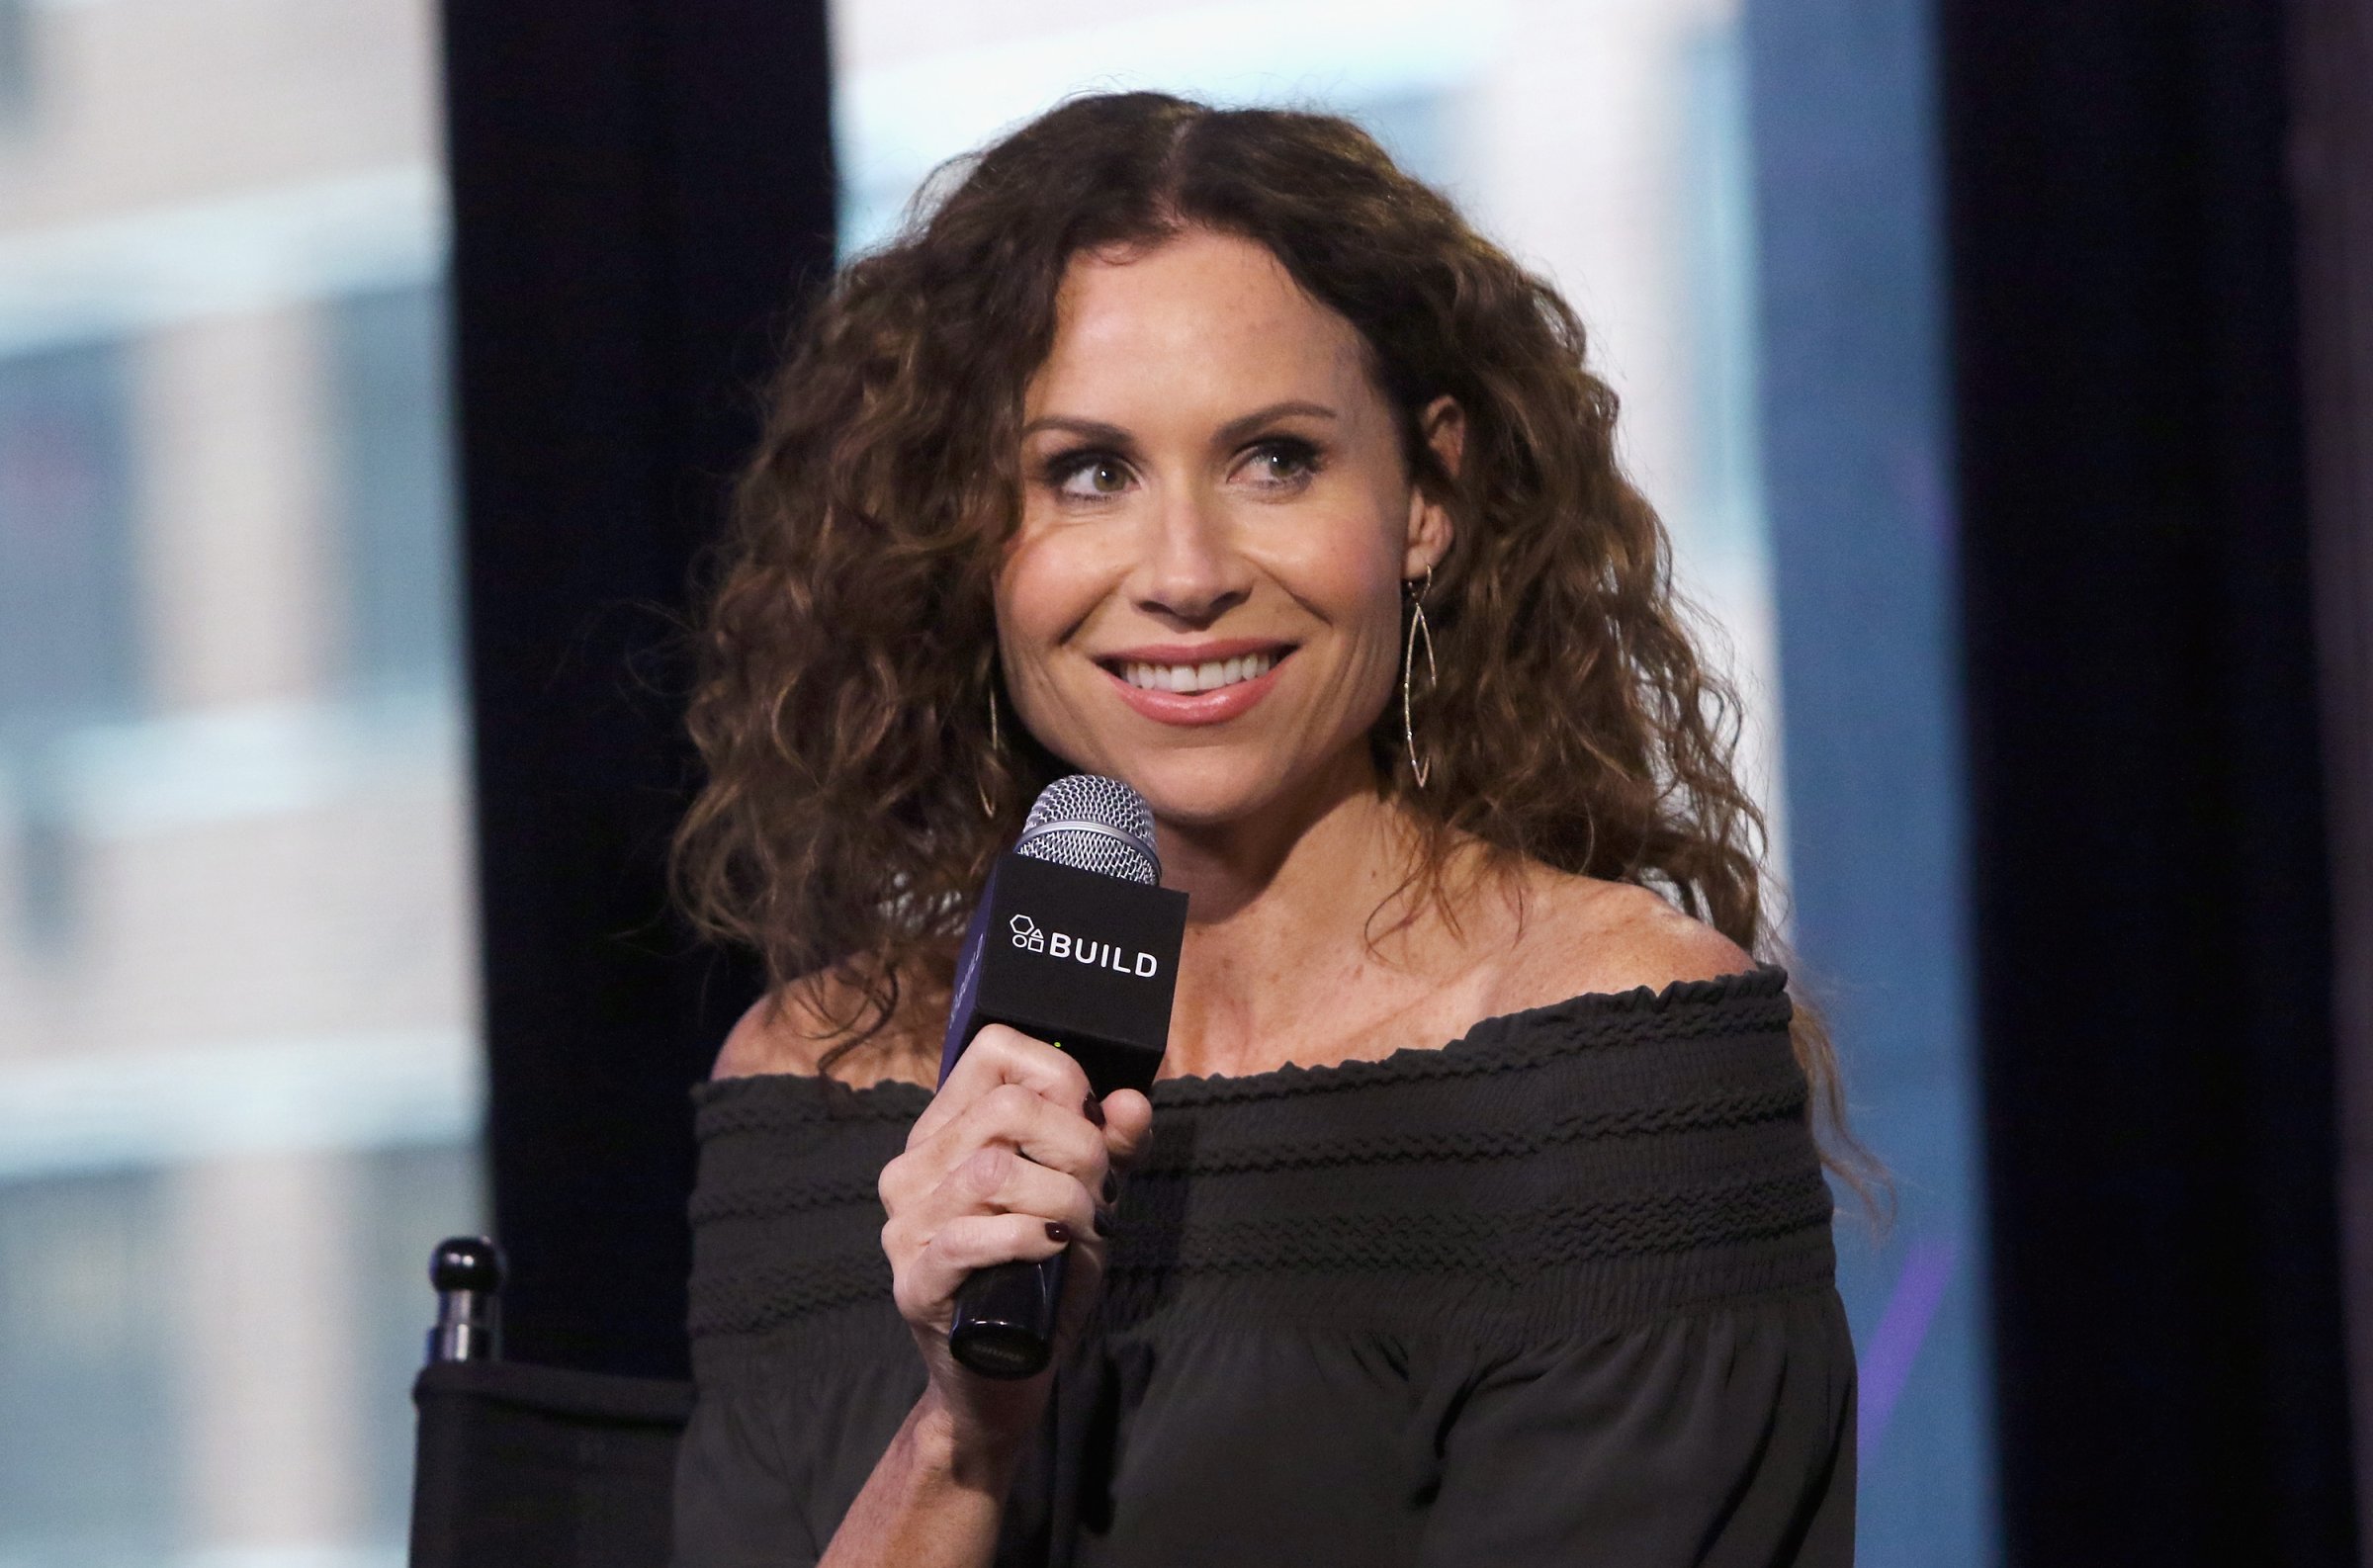 The Build Series Presents Minnie Driver Discussing The ABC Show "Speechless"